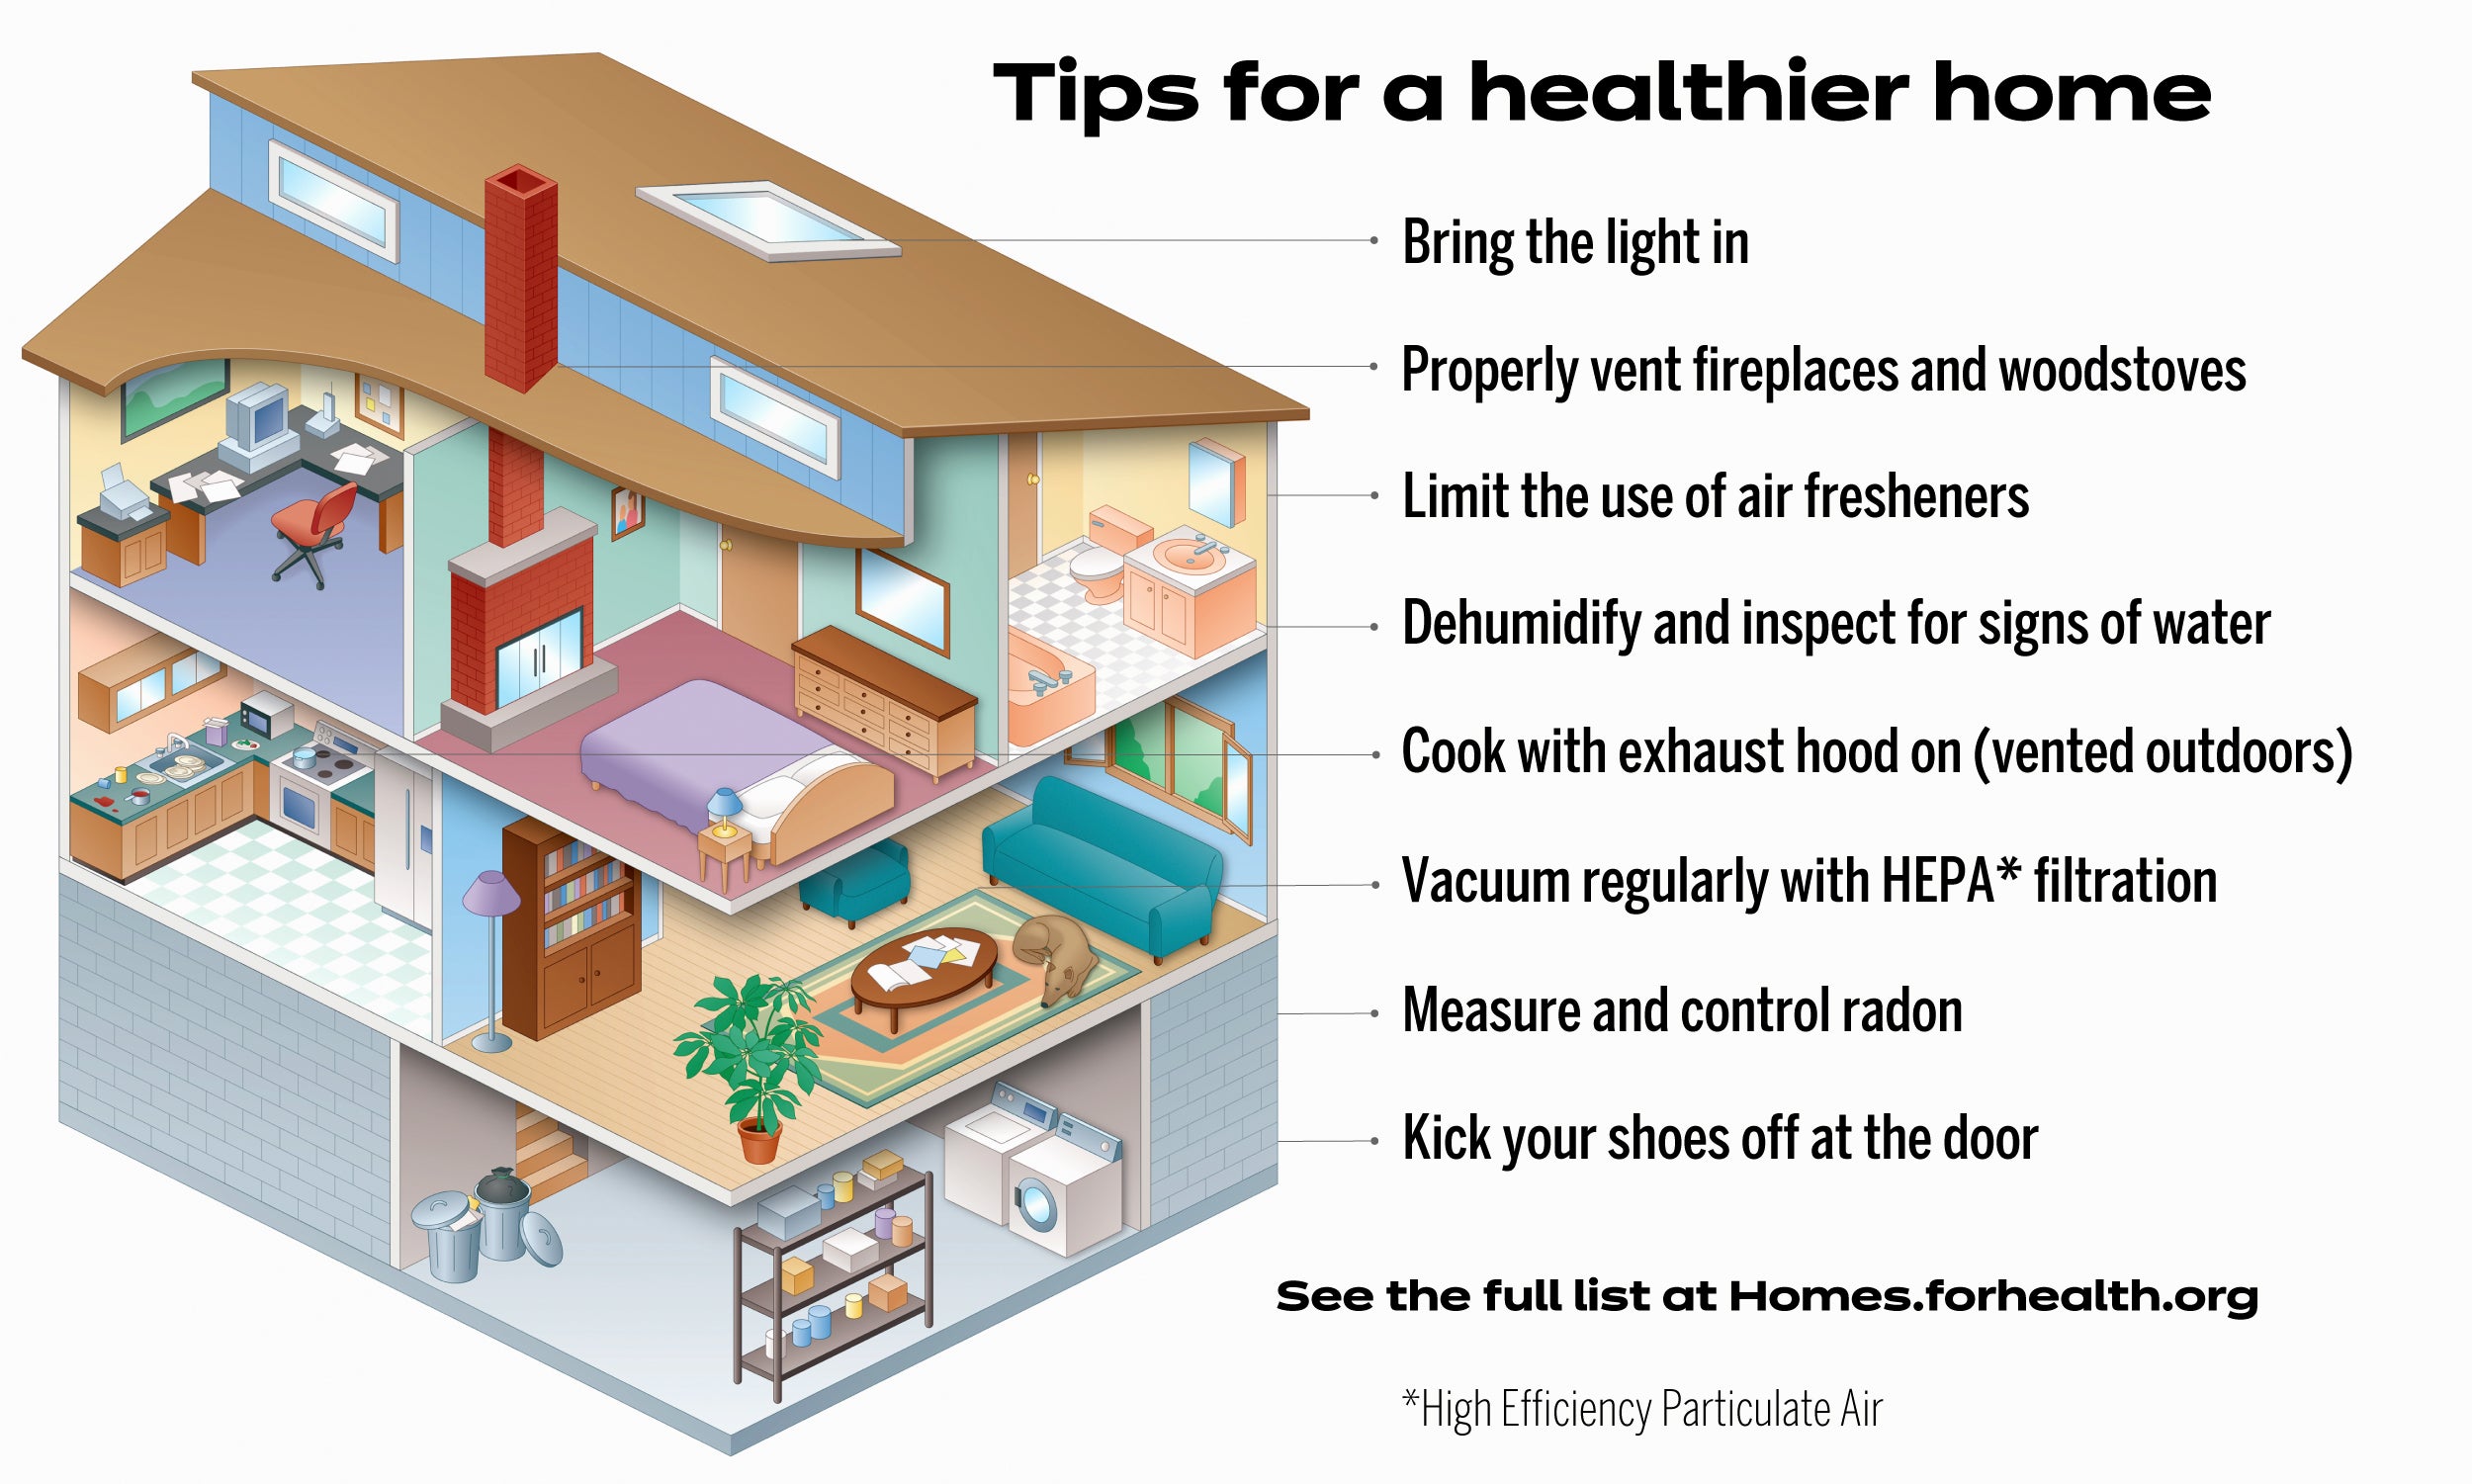 Cutaway of a home with tips for improving air quality - full list at https://homes.forhealth.org/.